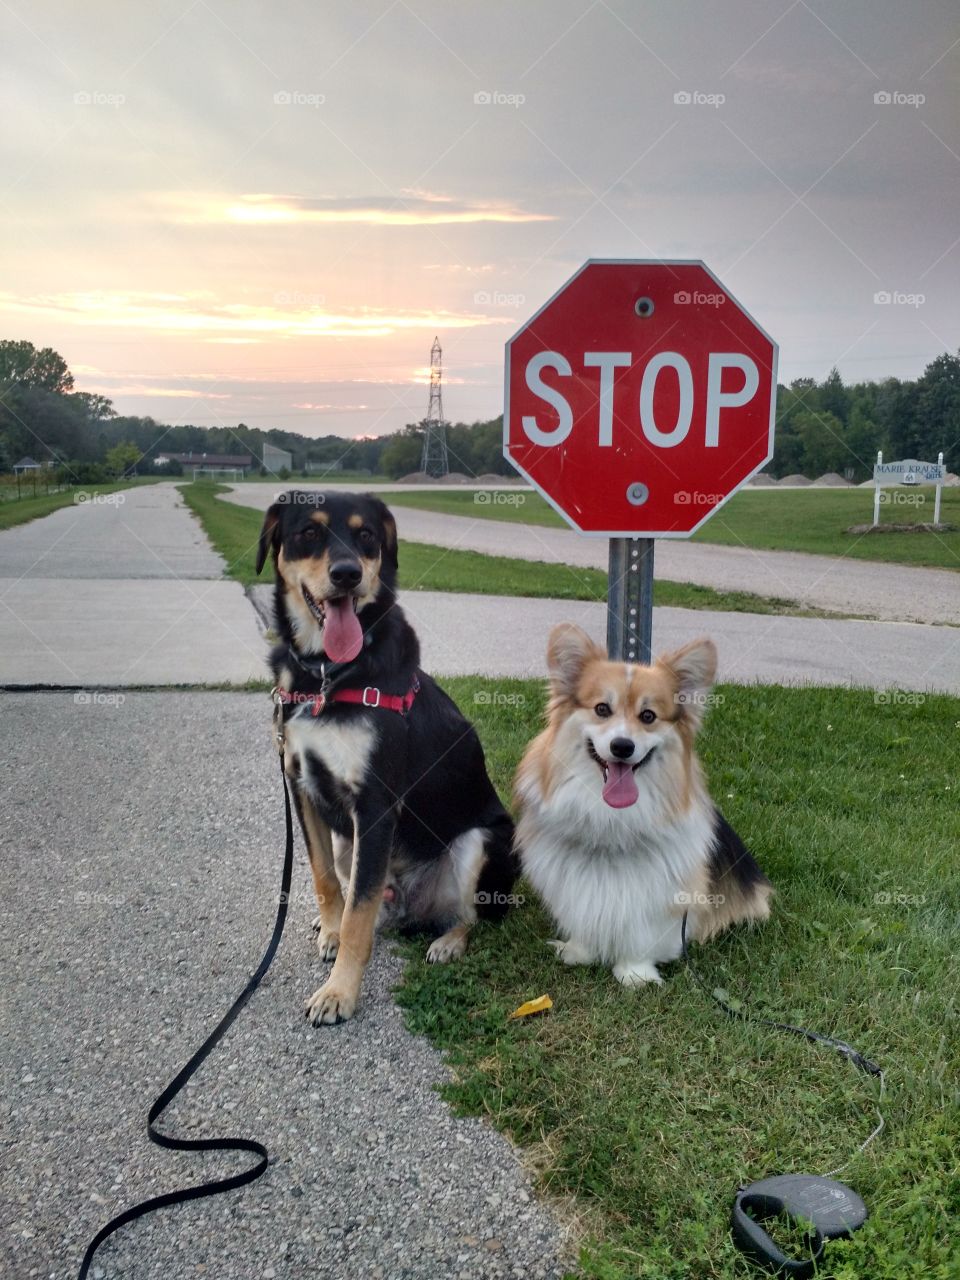 Obey the laws. dog walk